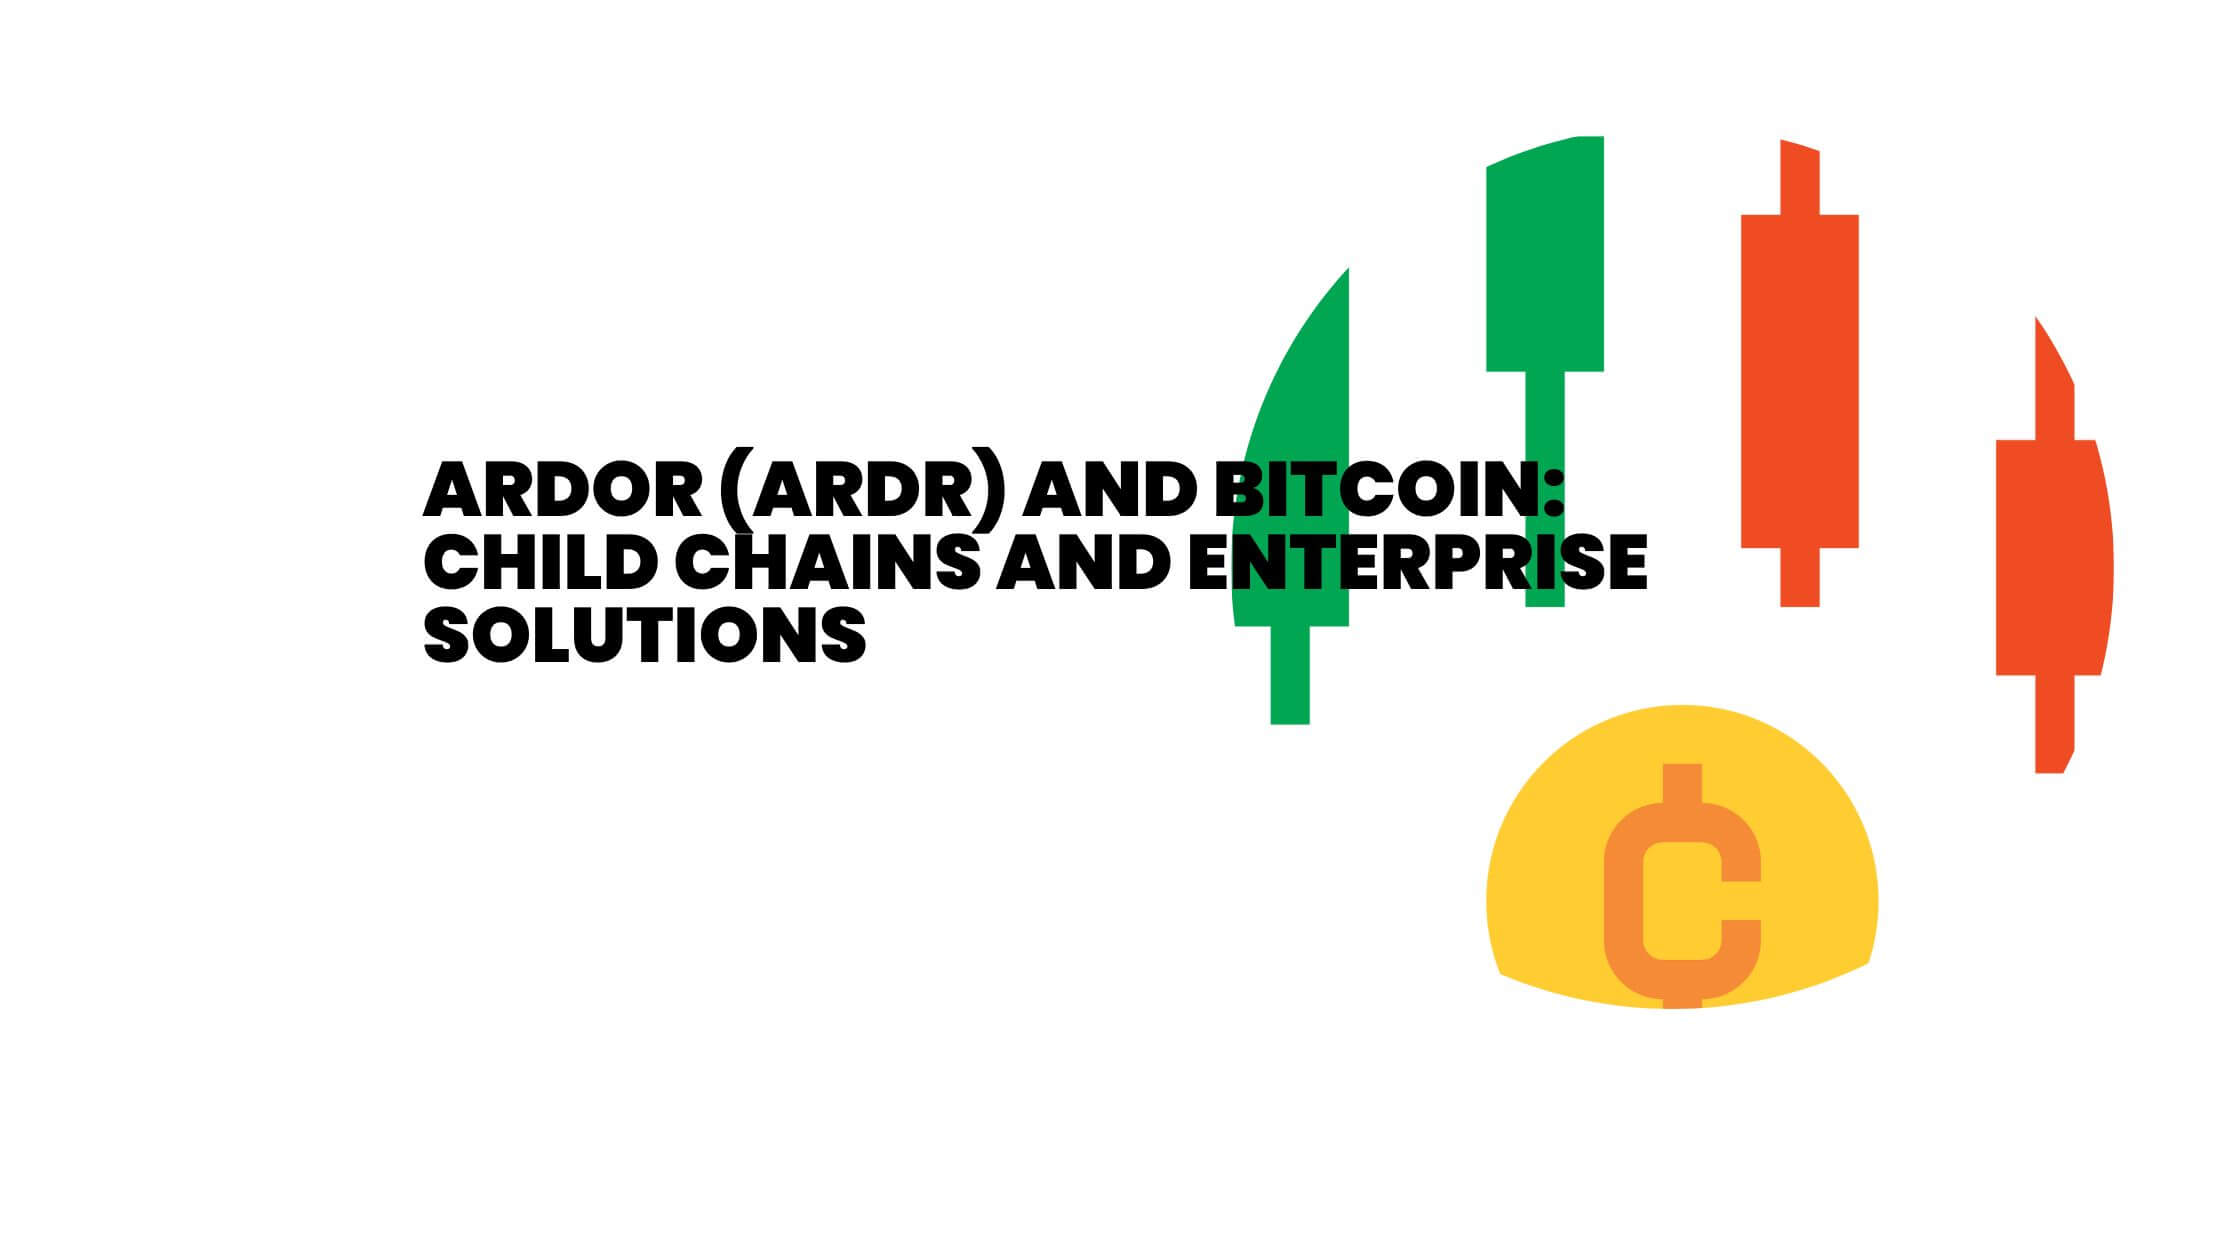 Ardor (ARDR) and Bitcoin Child Chains and Enterprise Solutions